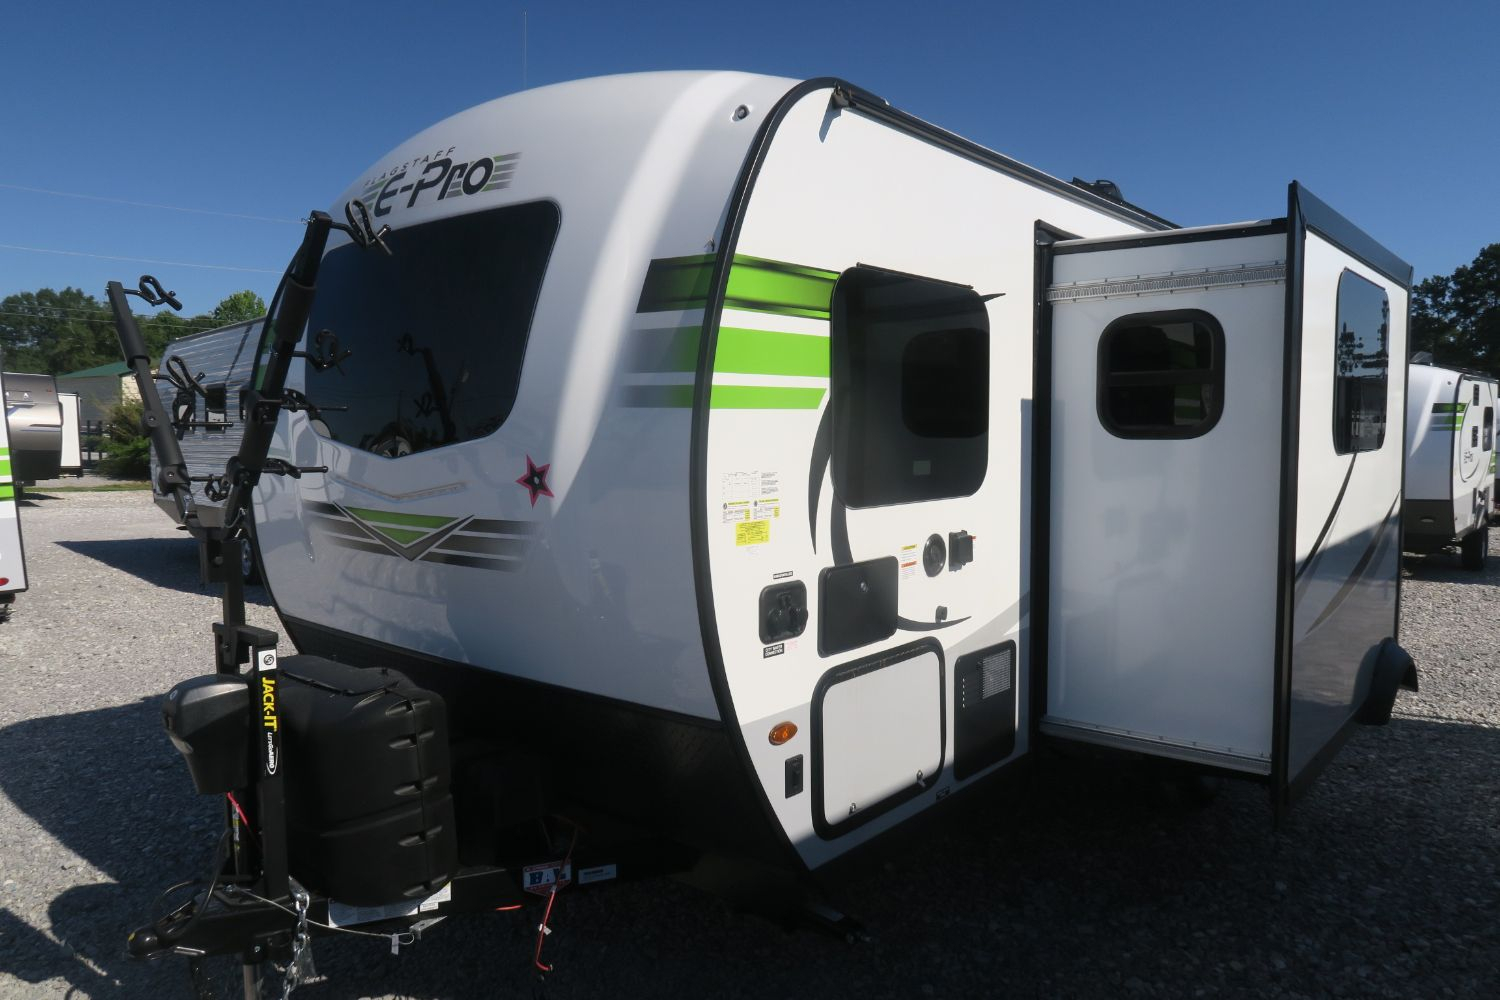 NEW 2020 FLAGSTAFF E-PRO 20BHS - Overview | Berryland Campers